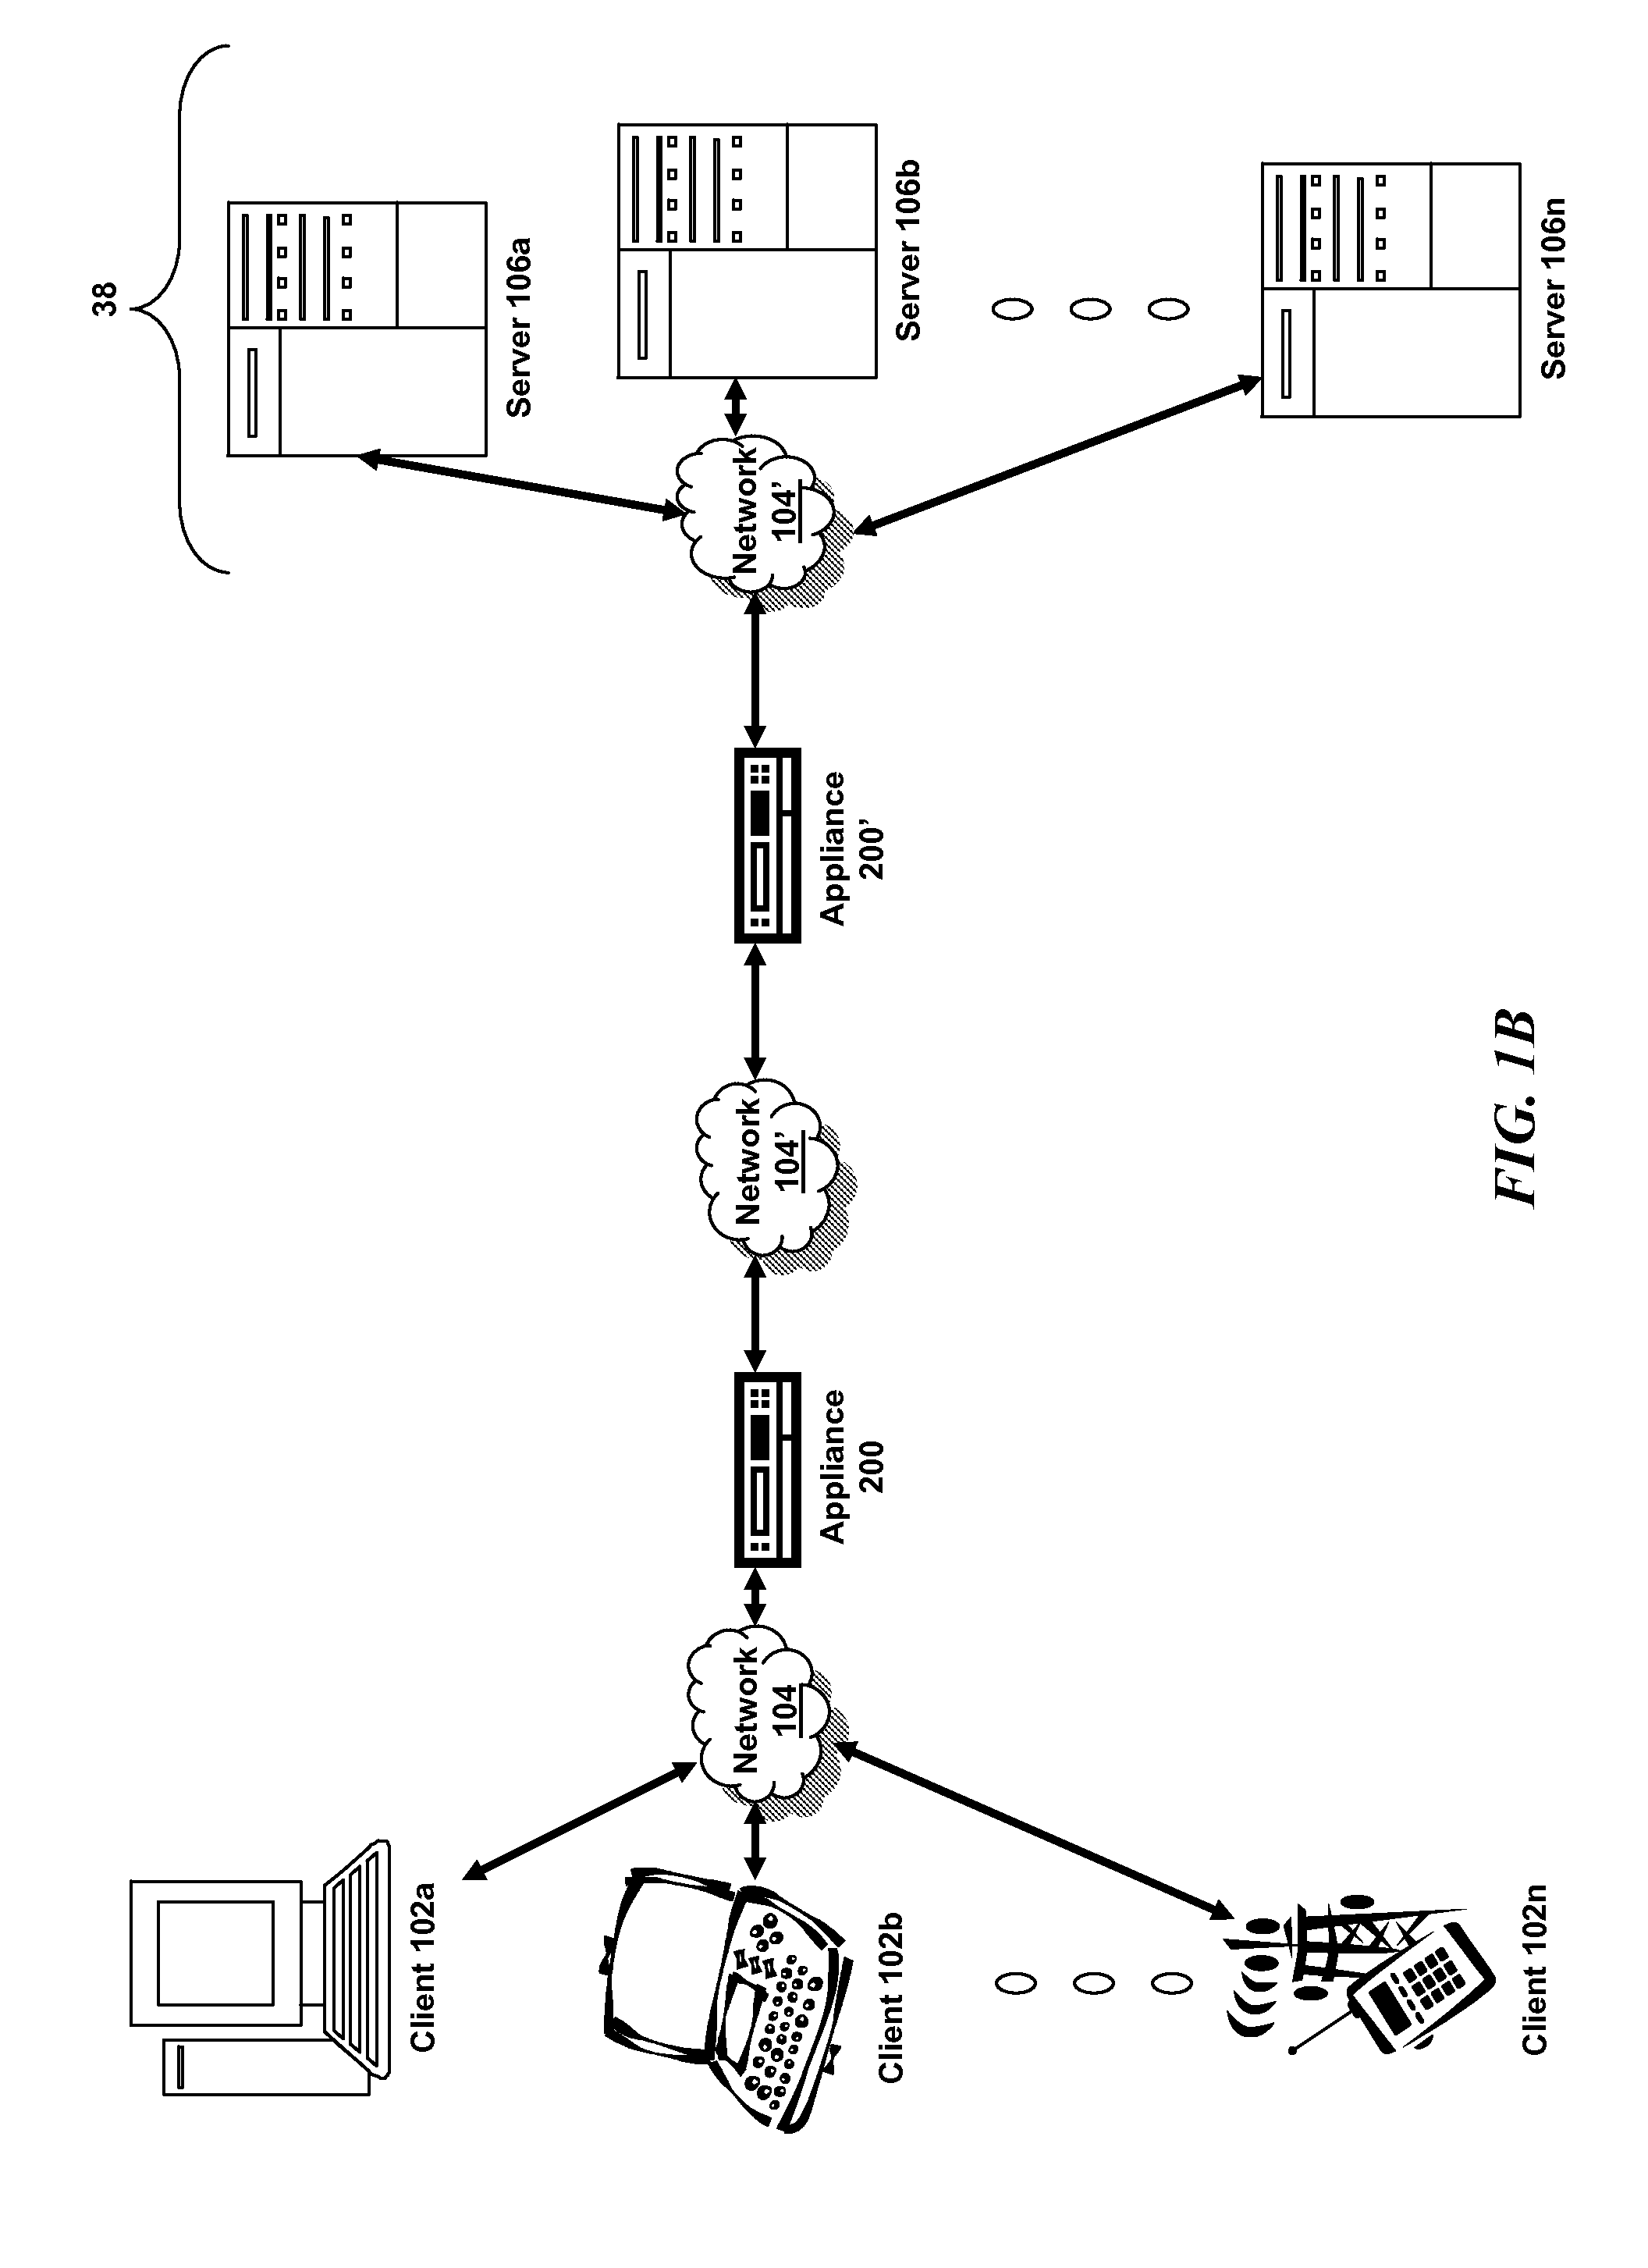 Systems and methods for processing application firewall session information on owner core in multiple core system